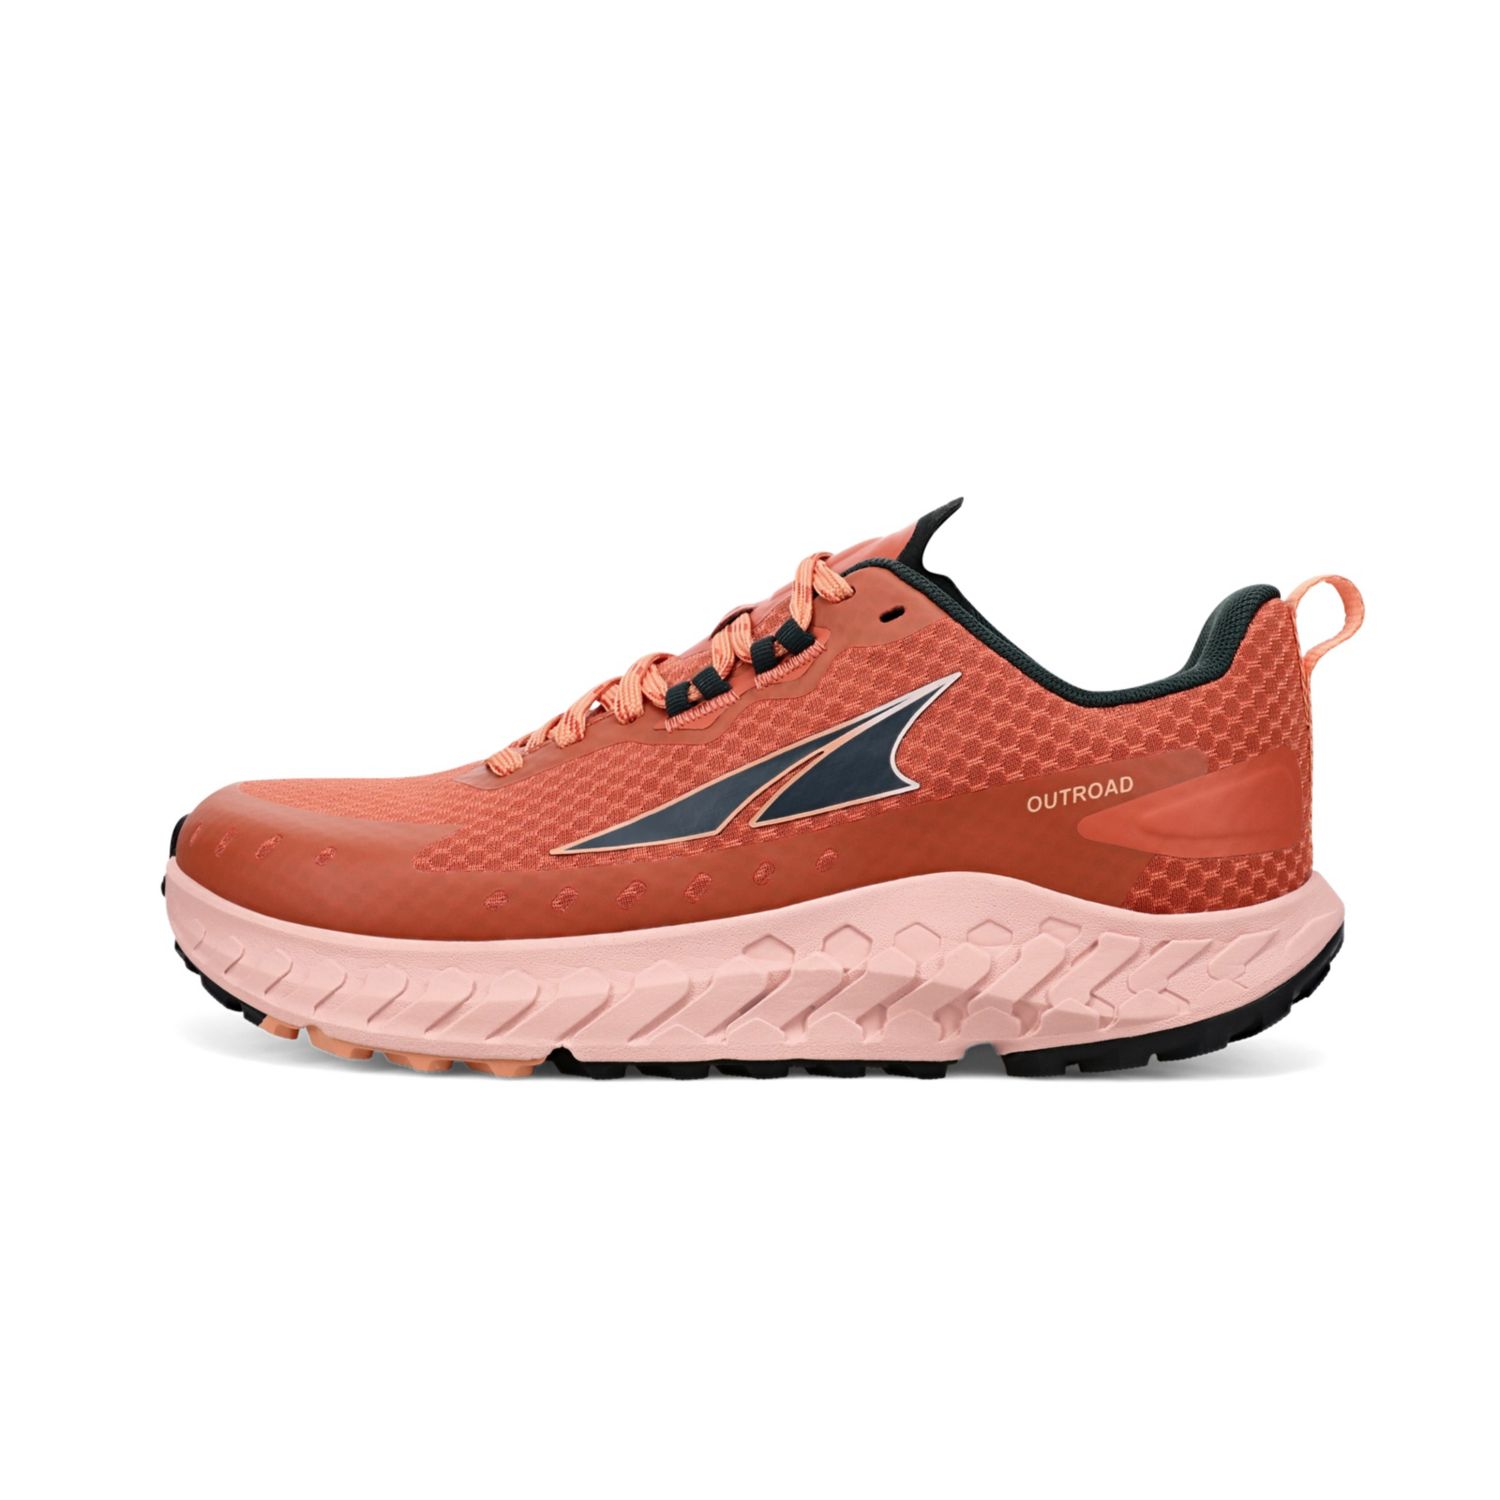 Red / Orange Altra Outroad Women's Trail Running Shoes | Ireland-45683279